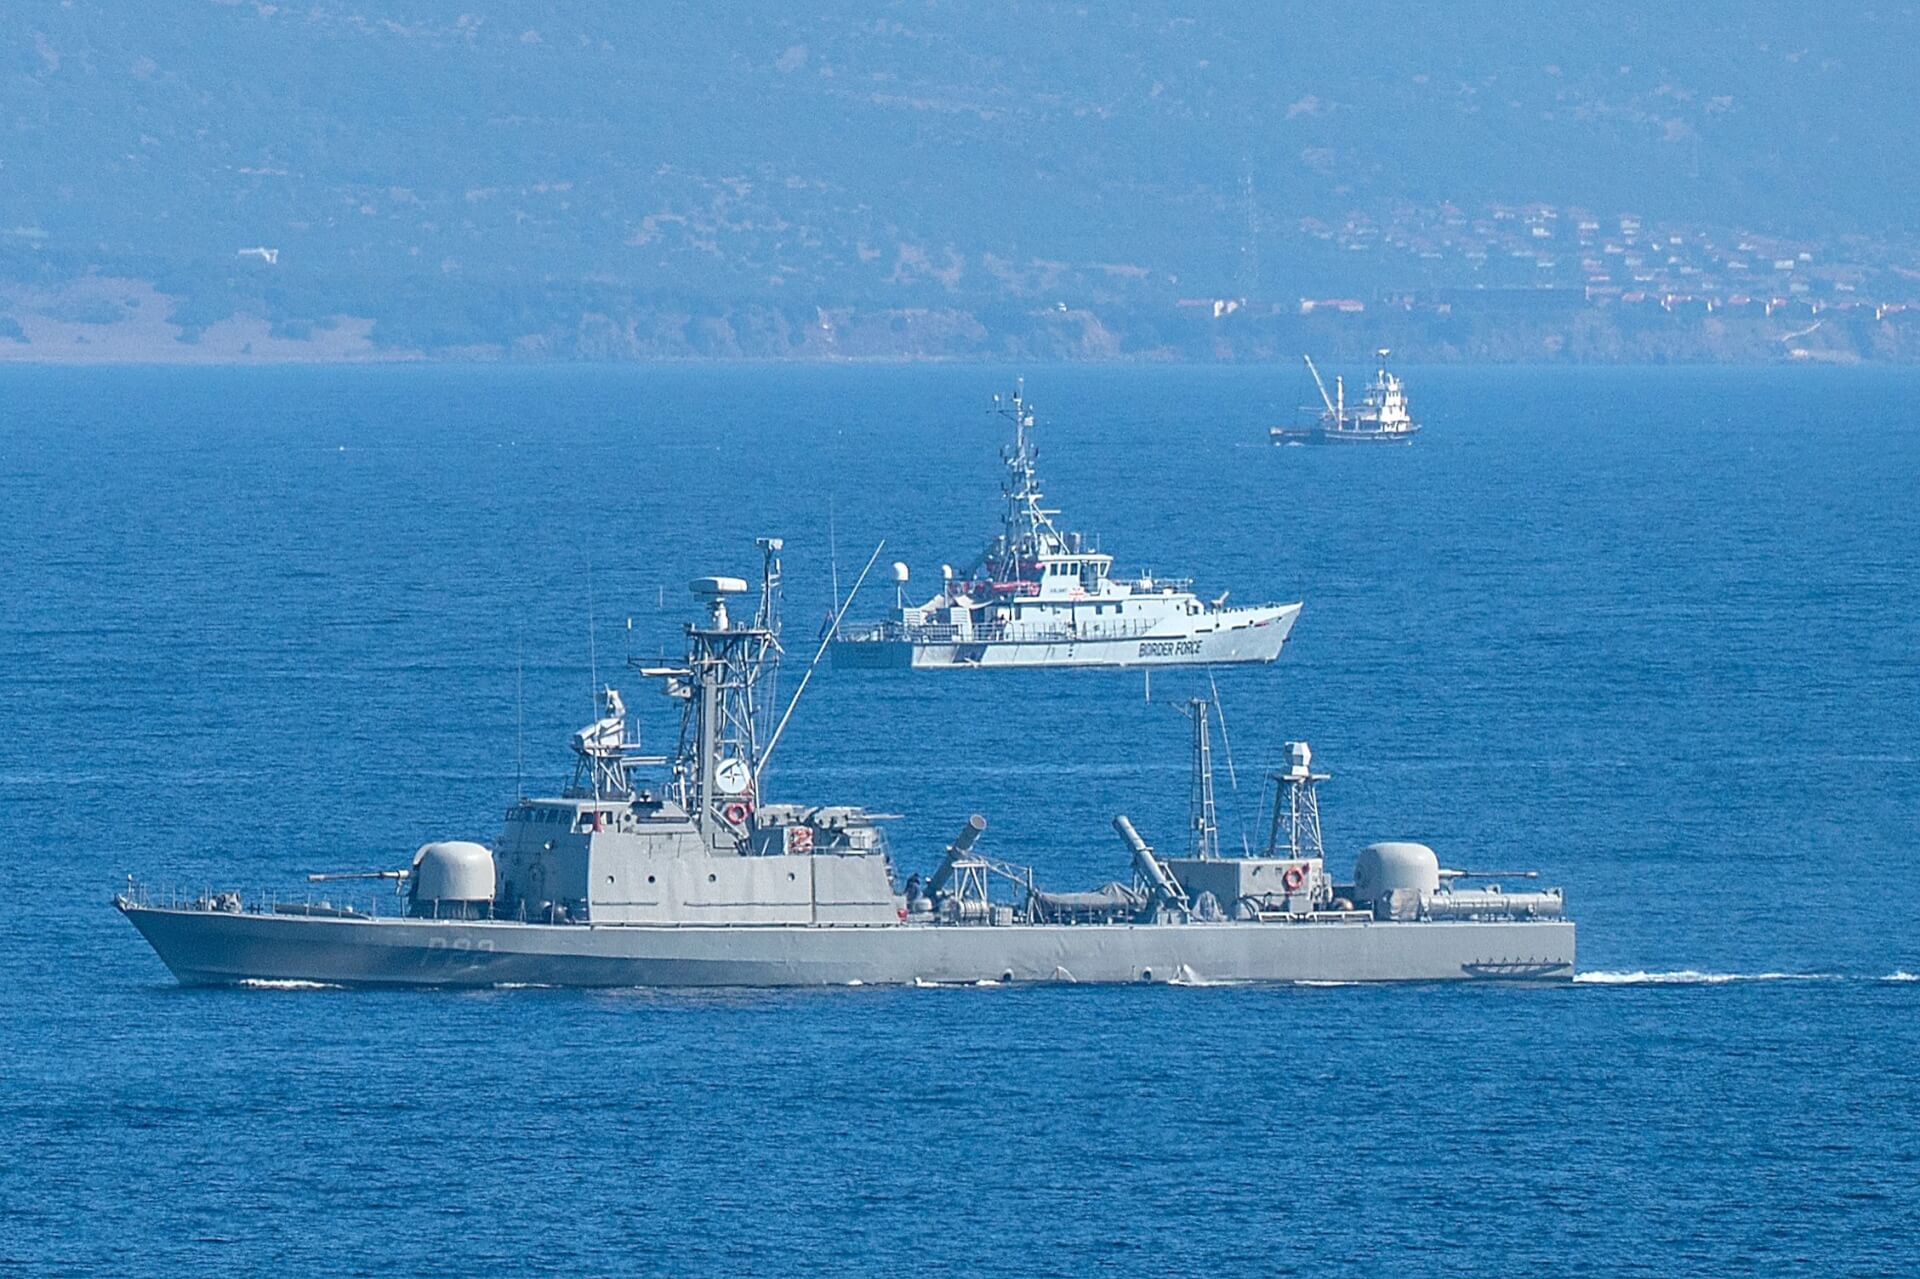 Turkey Says Greece Provoking Conflict After Video Shows Greek Military Activity in Aegean